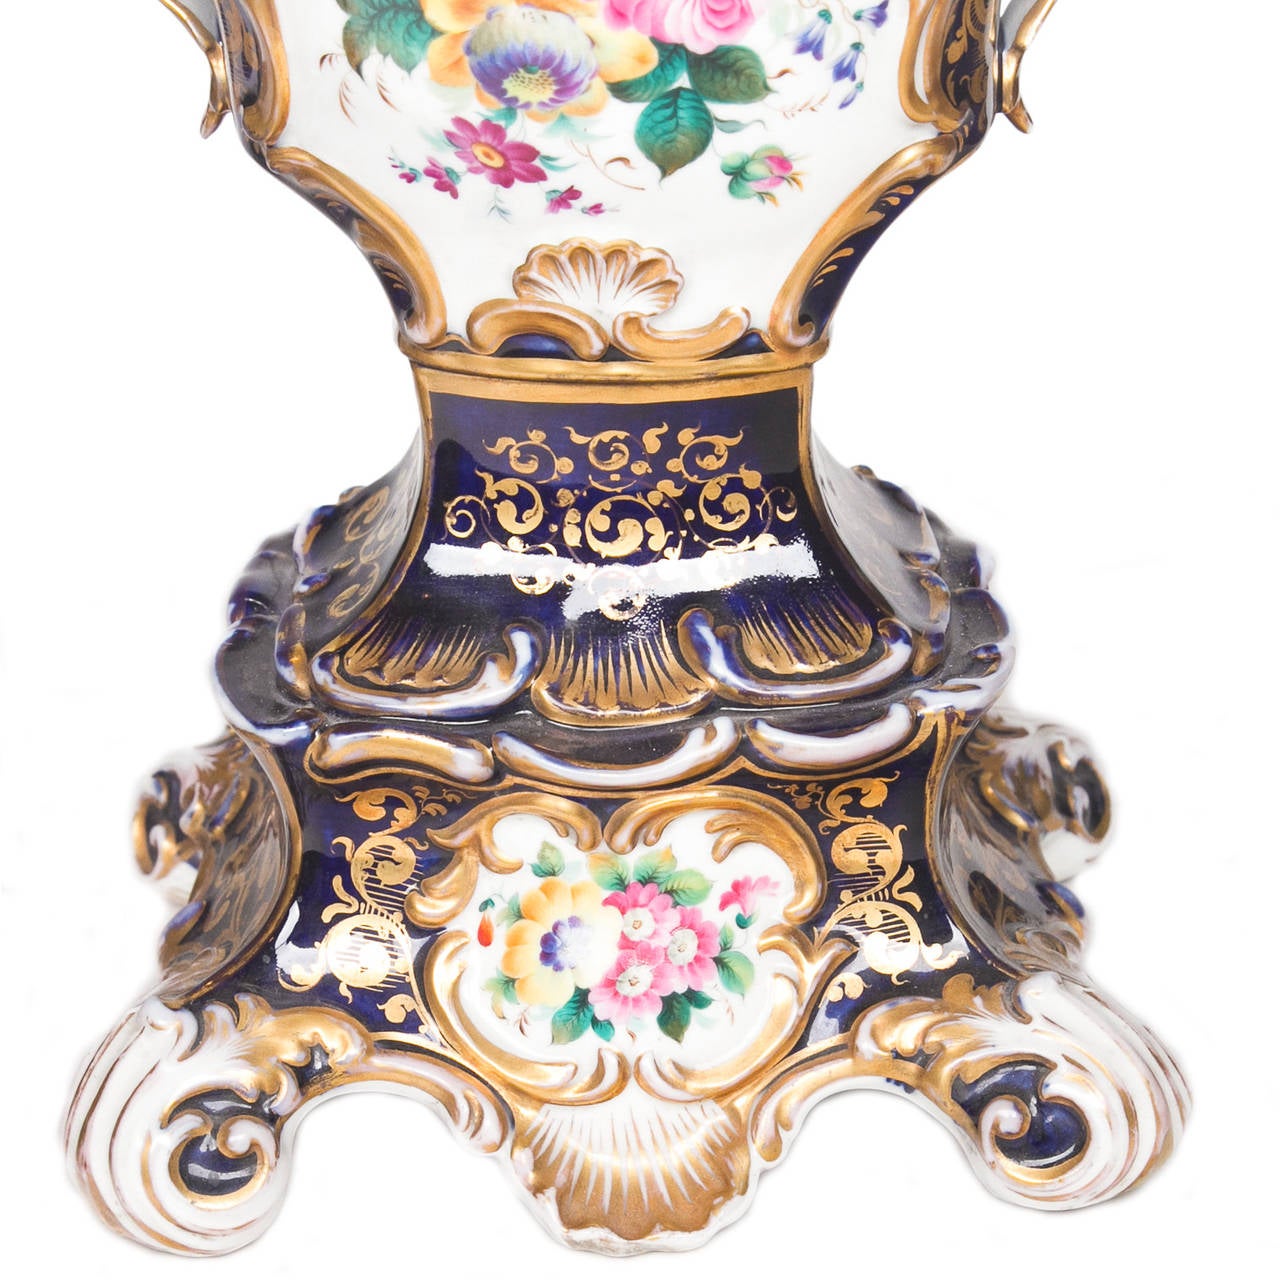 An important pair of old Paris hand-painted urns with scrolled and scalloped designs. These rest on an elaborate base and have pierced handles. Wonderful cobalt blue dominate color. Gilding and strong color palate highlight the urns in floral